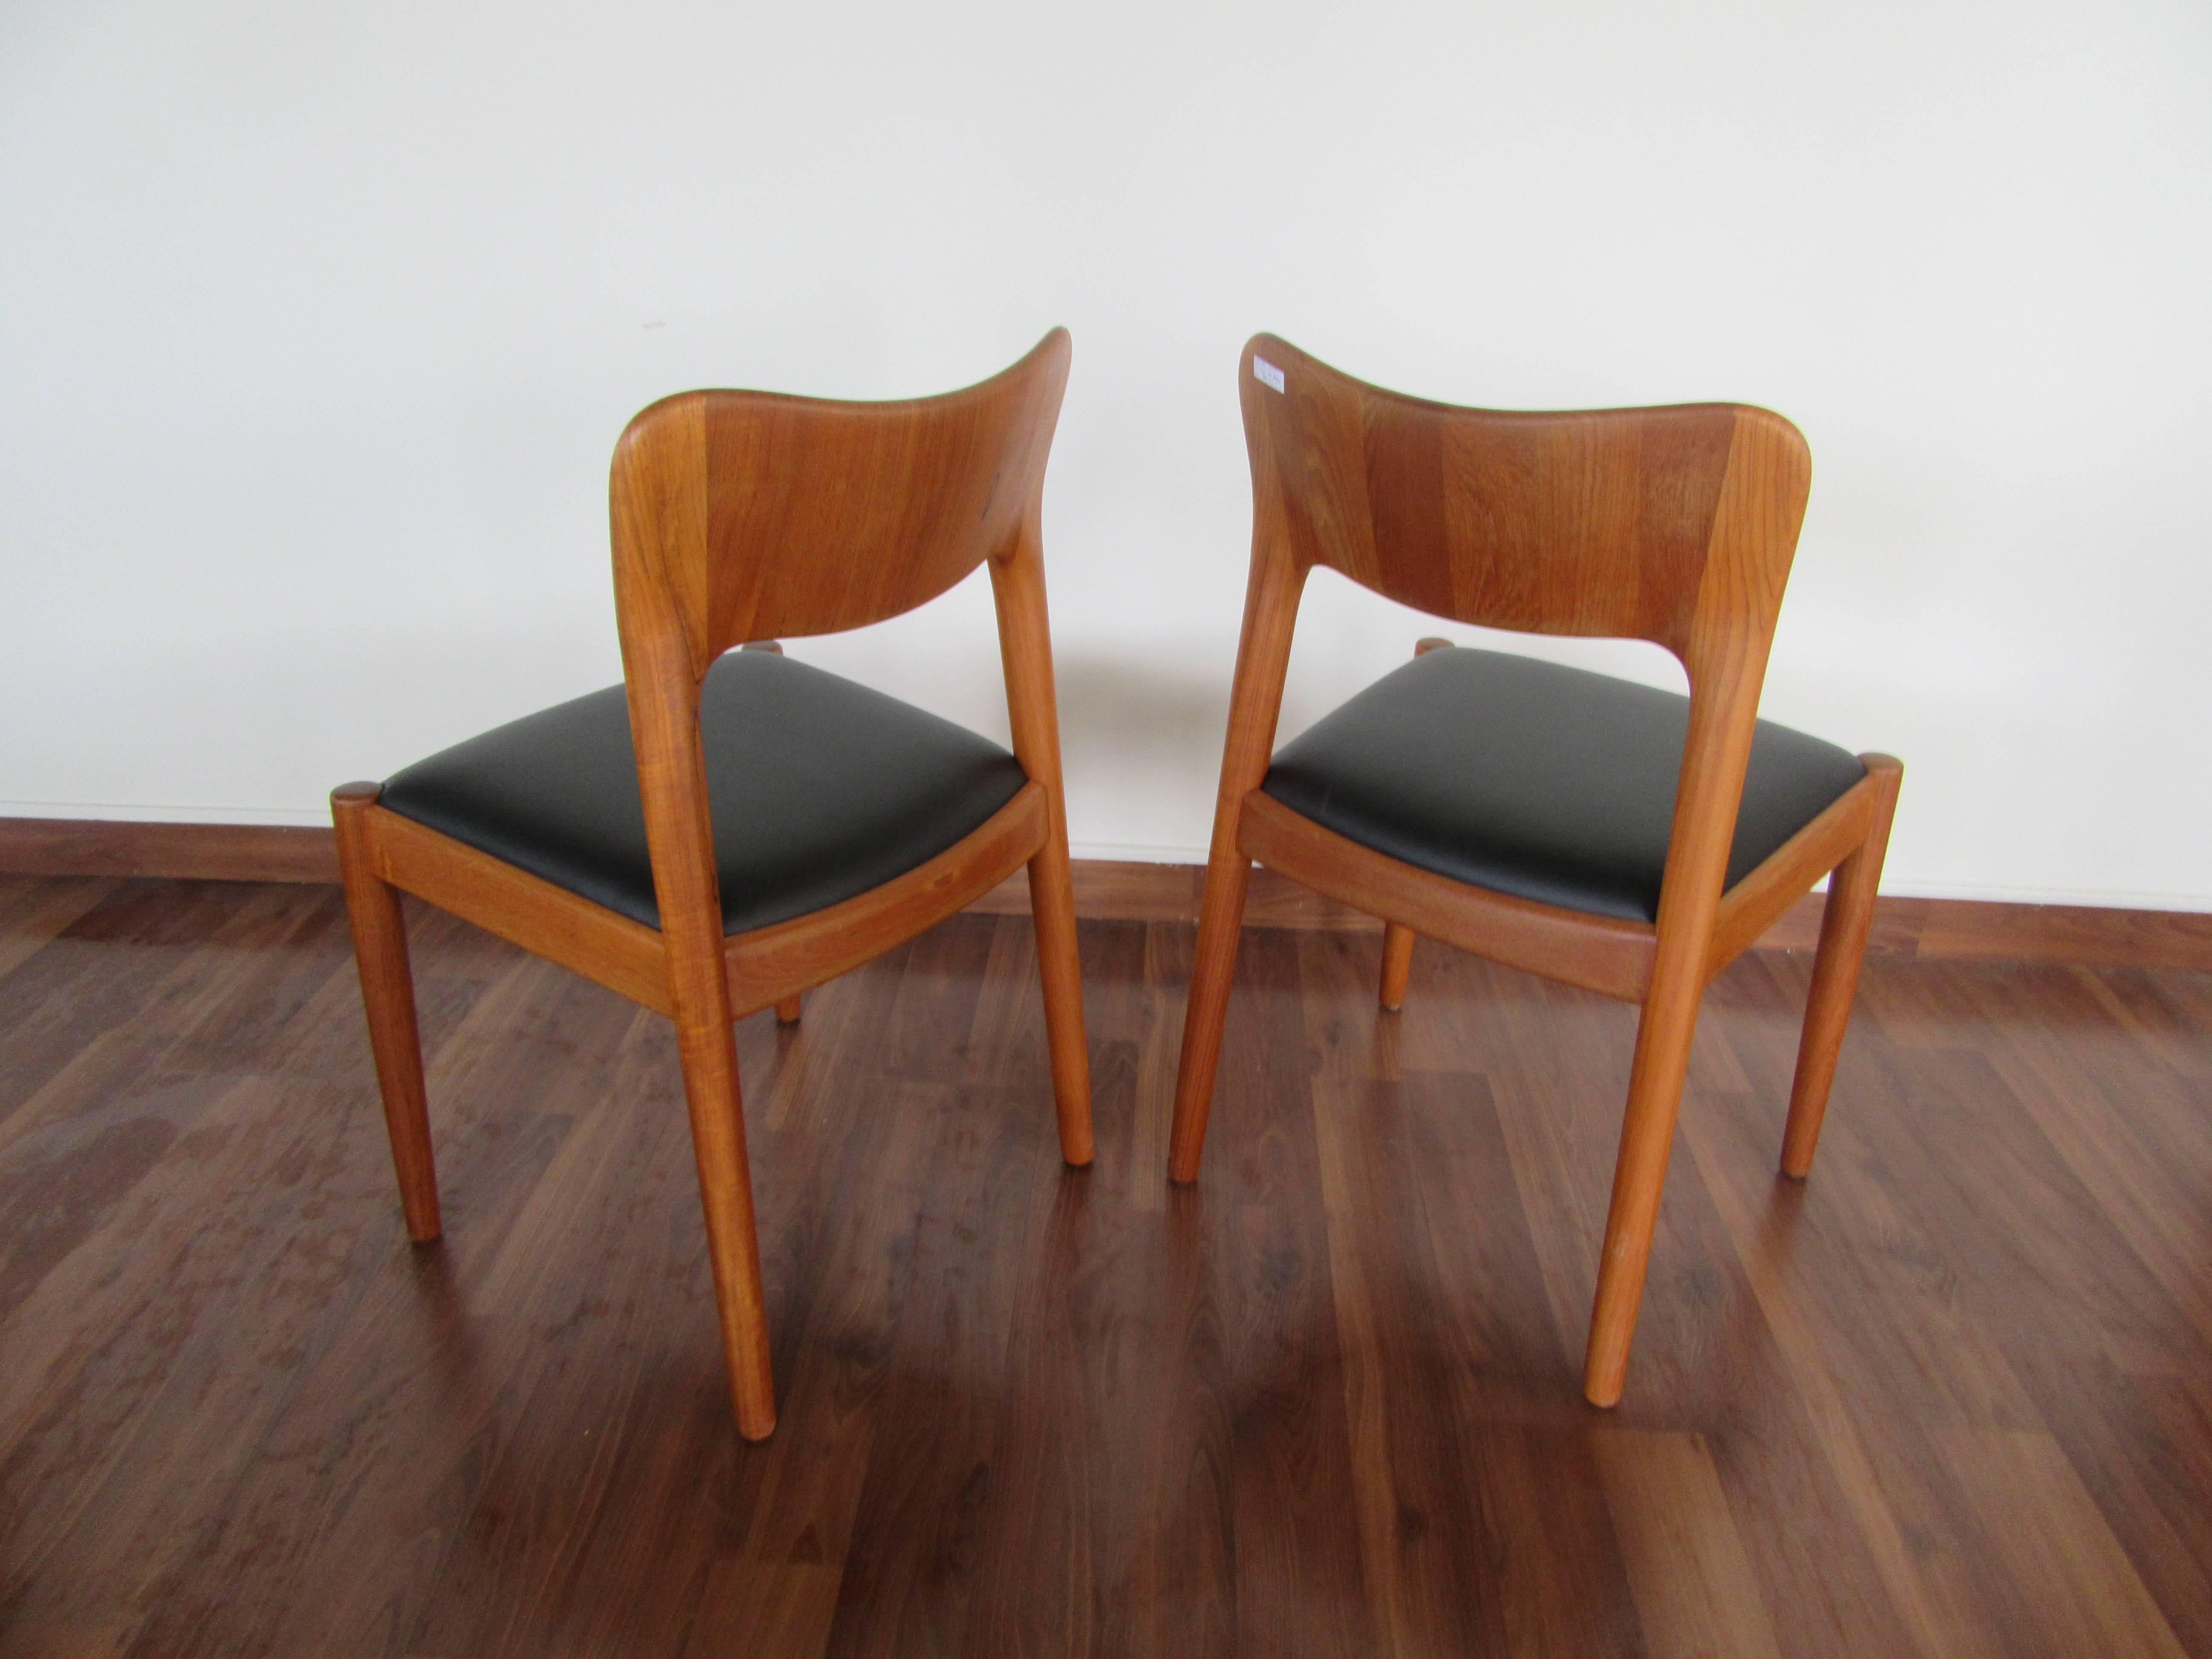 Set of Three Teak Dining Chairs by Koefoed Hornslet with Leather Seats 2